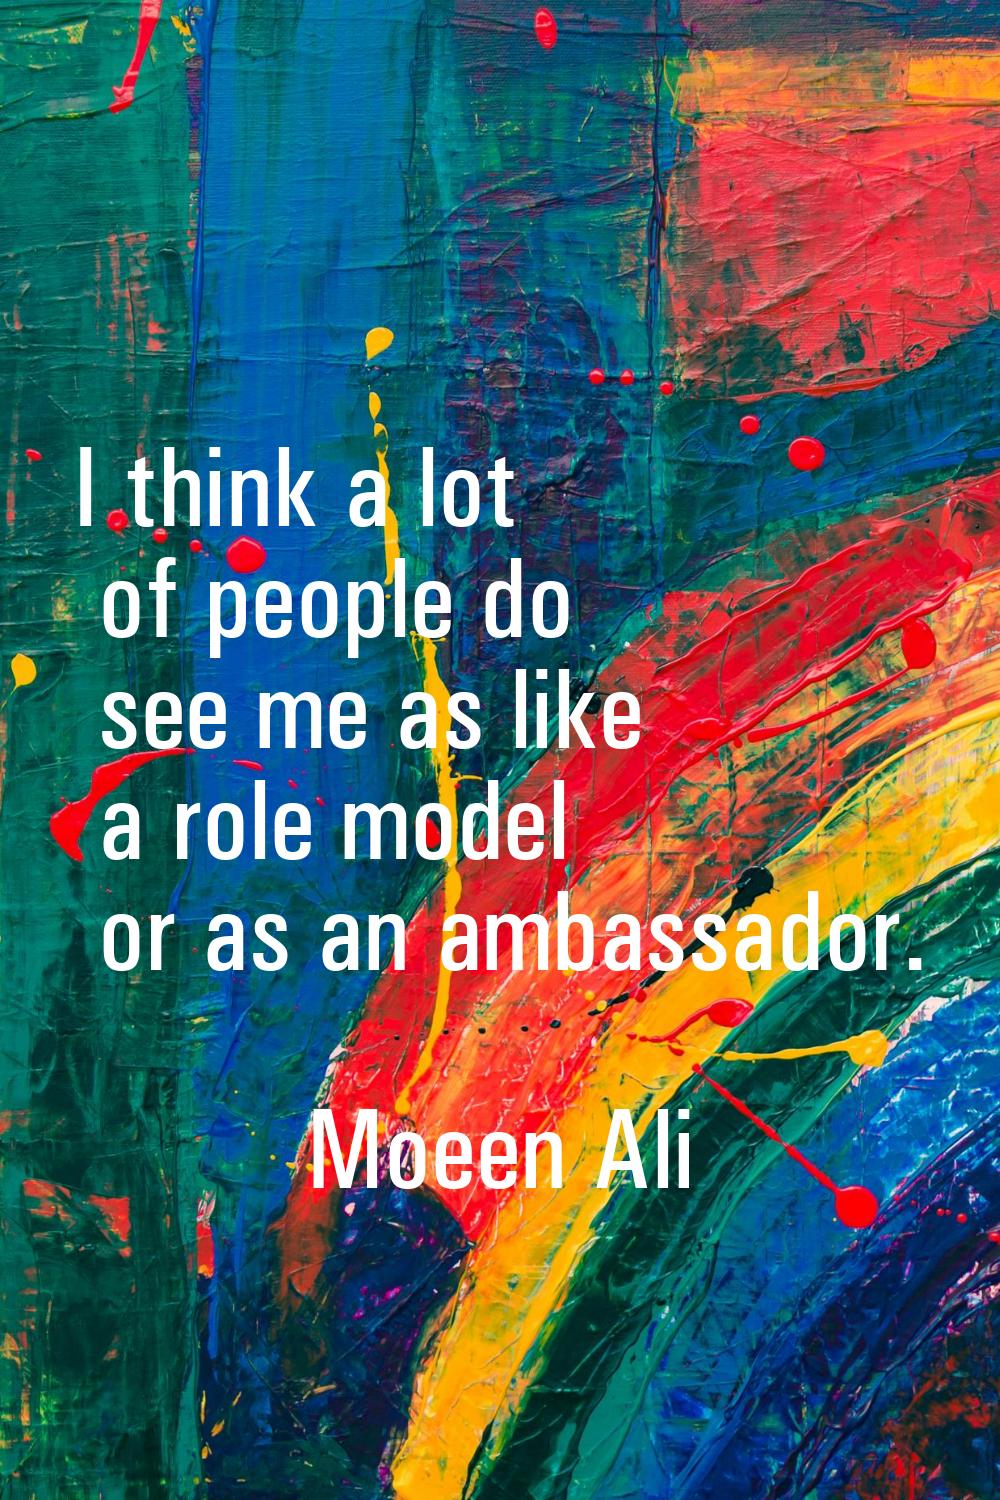 I think a lot of people do see me as like a role model or as an ambassador.